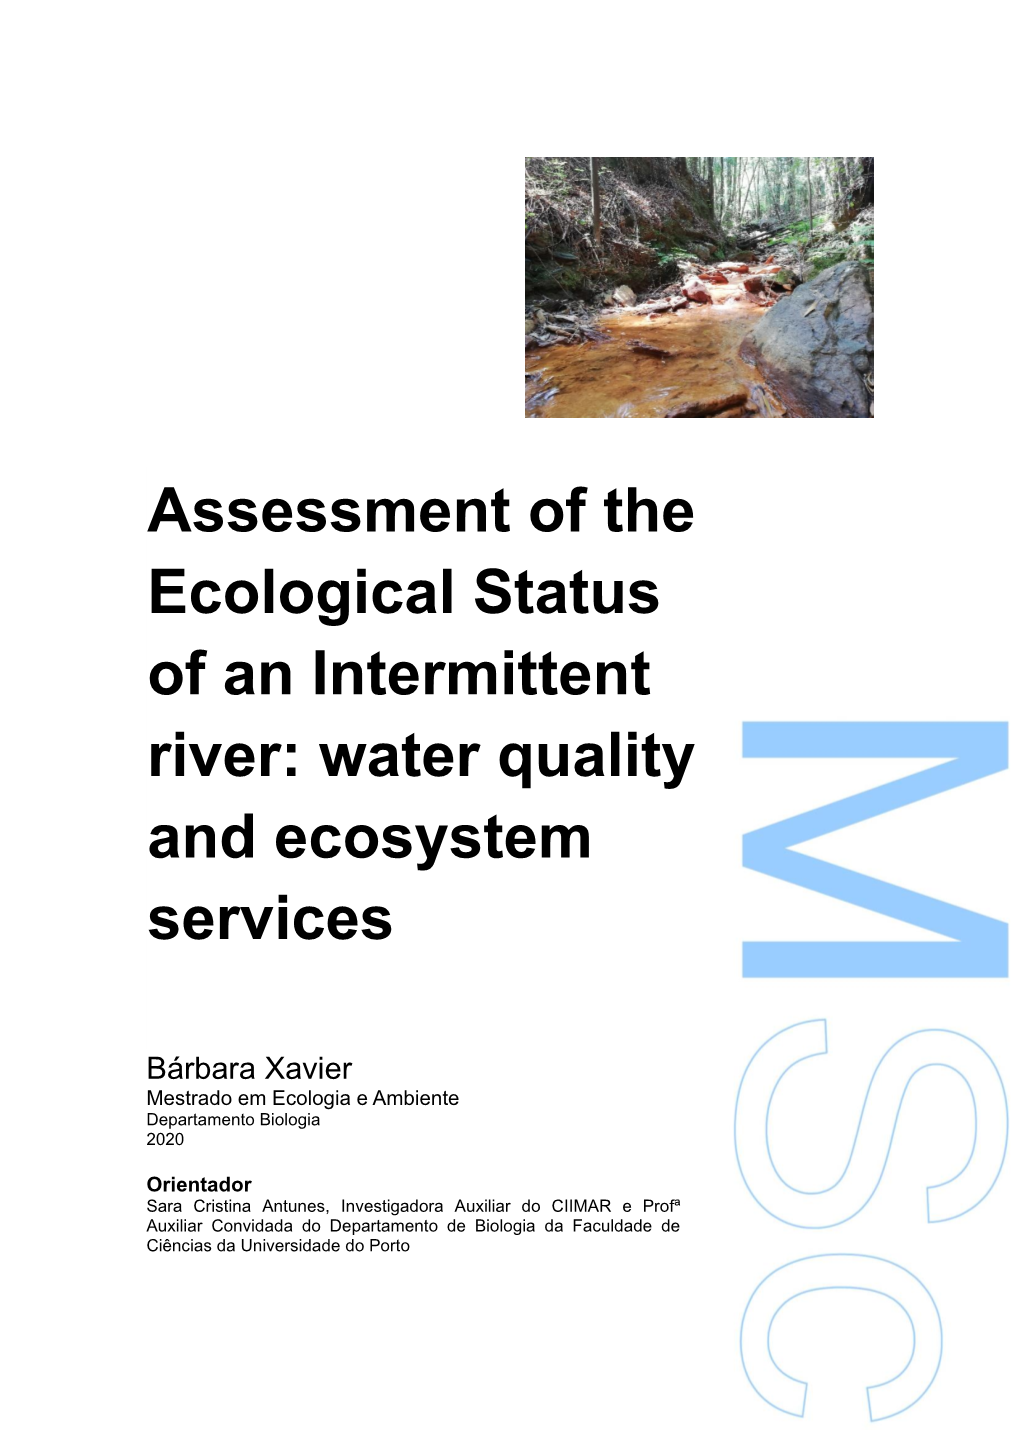 Assessment of the Ecological Status of an Intermittent River: Water Quality and Ecosystem Services